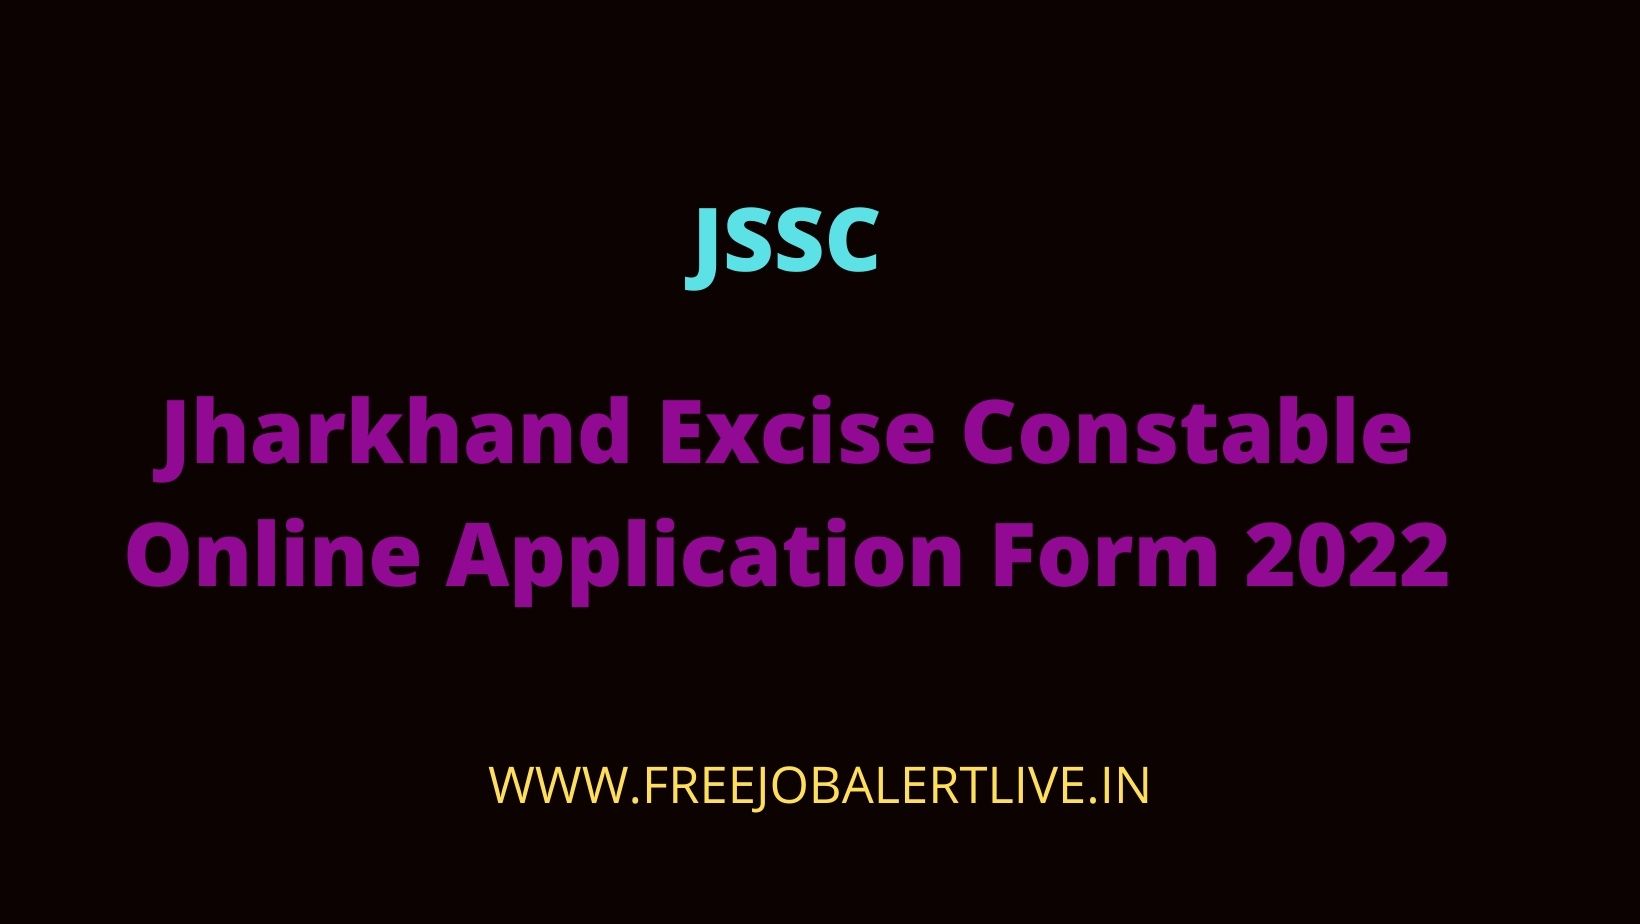 Jharkhand Excise Constable Online Application Form 2022